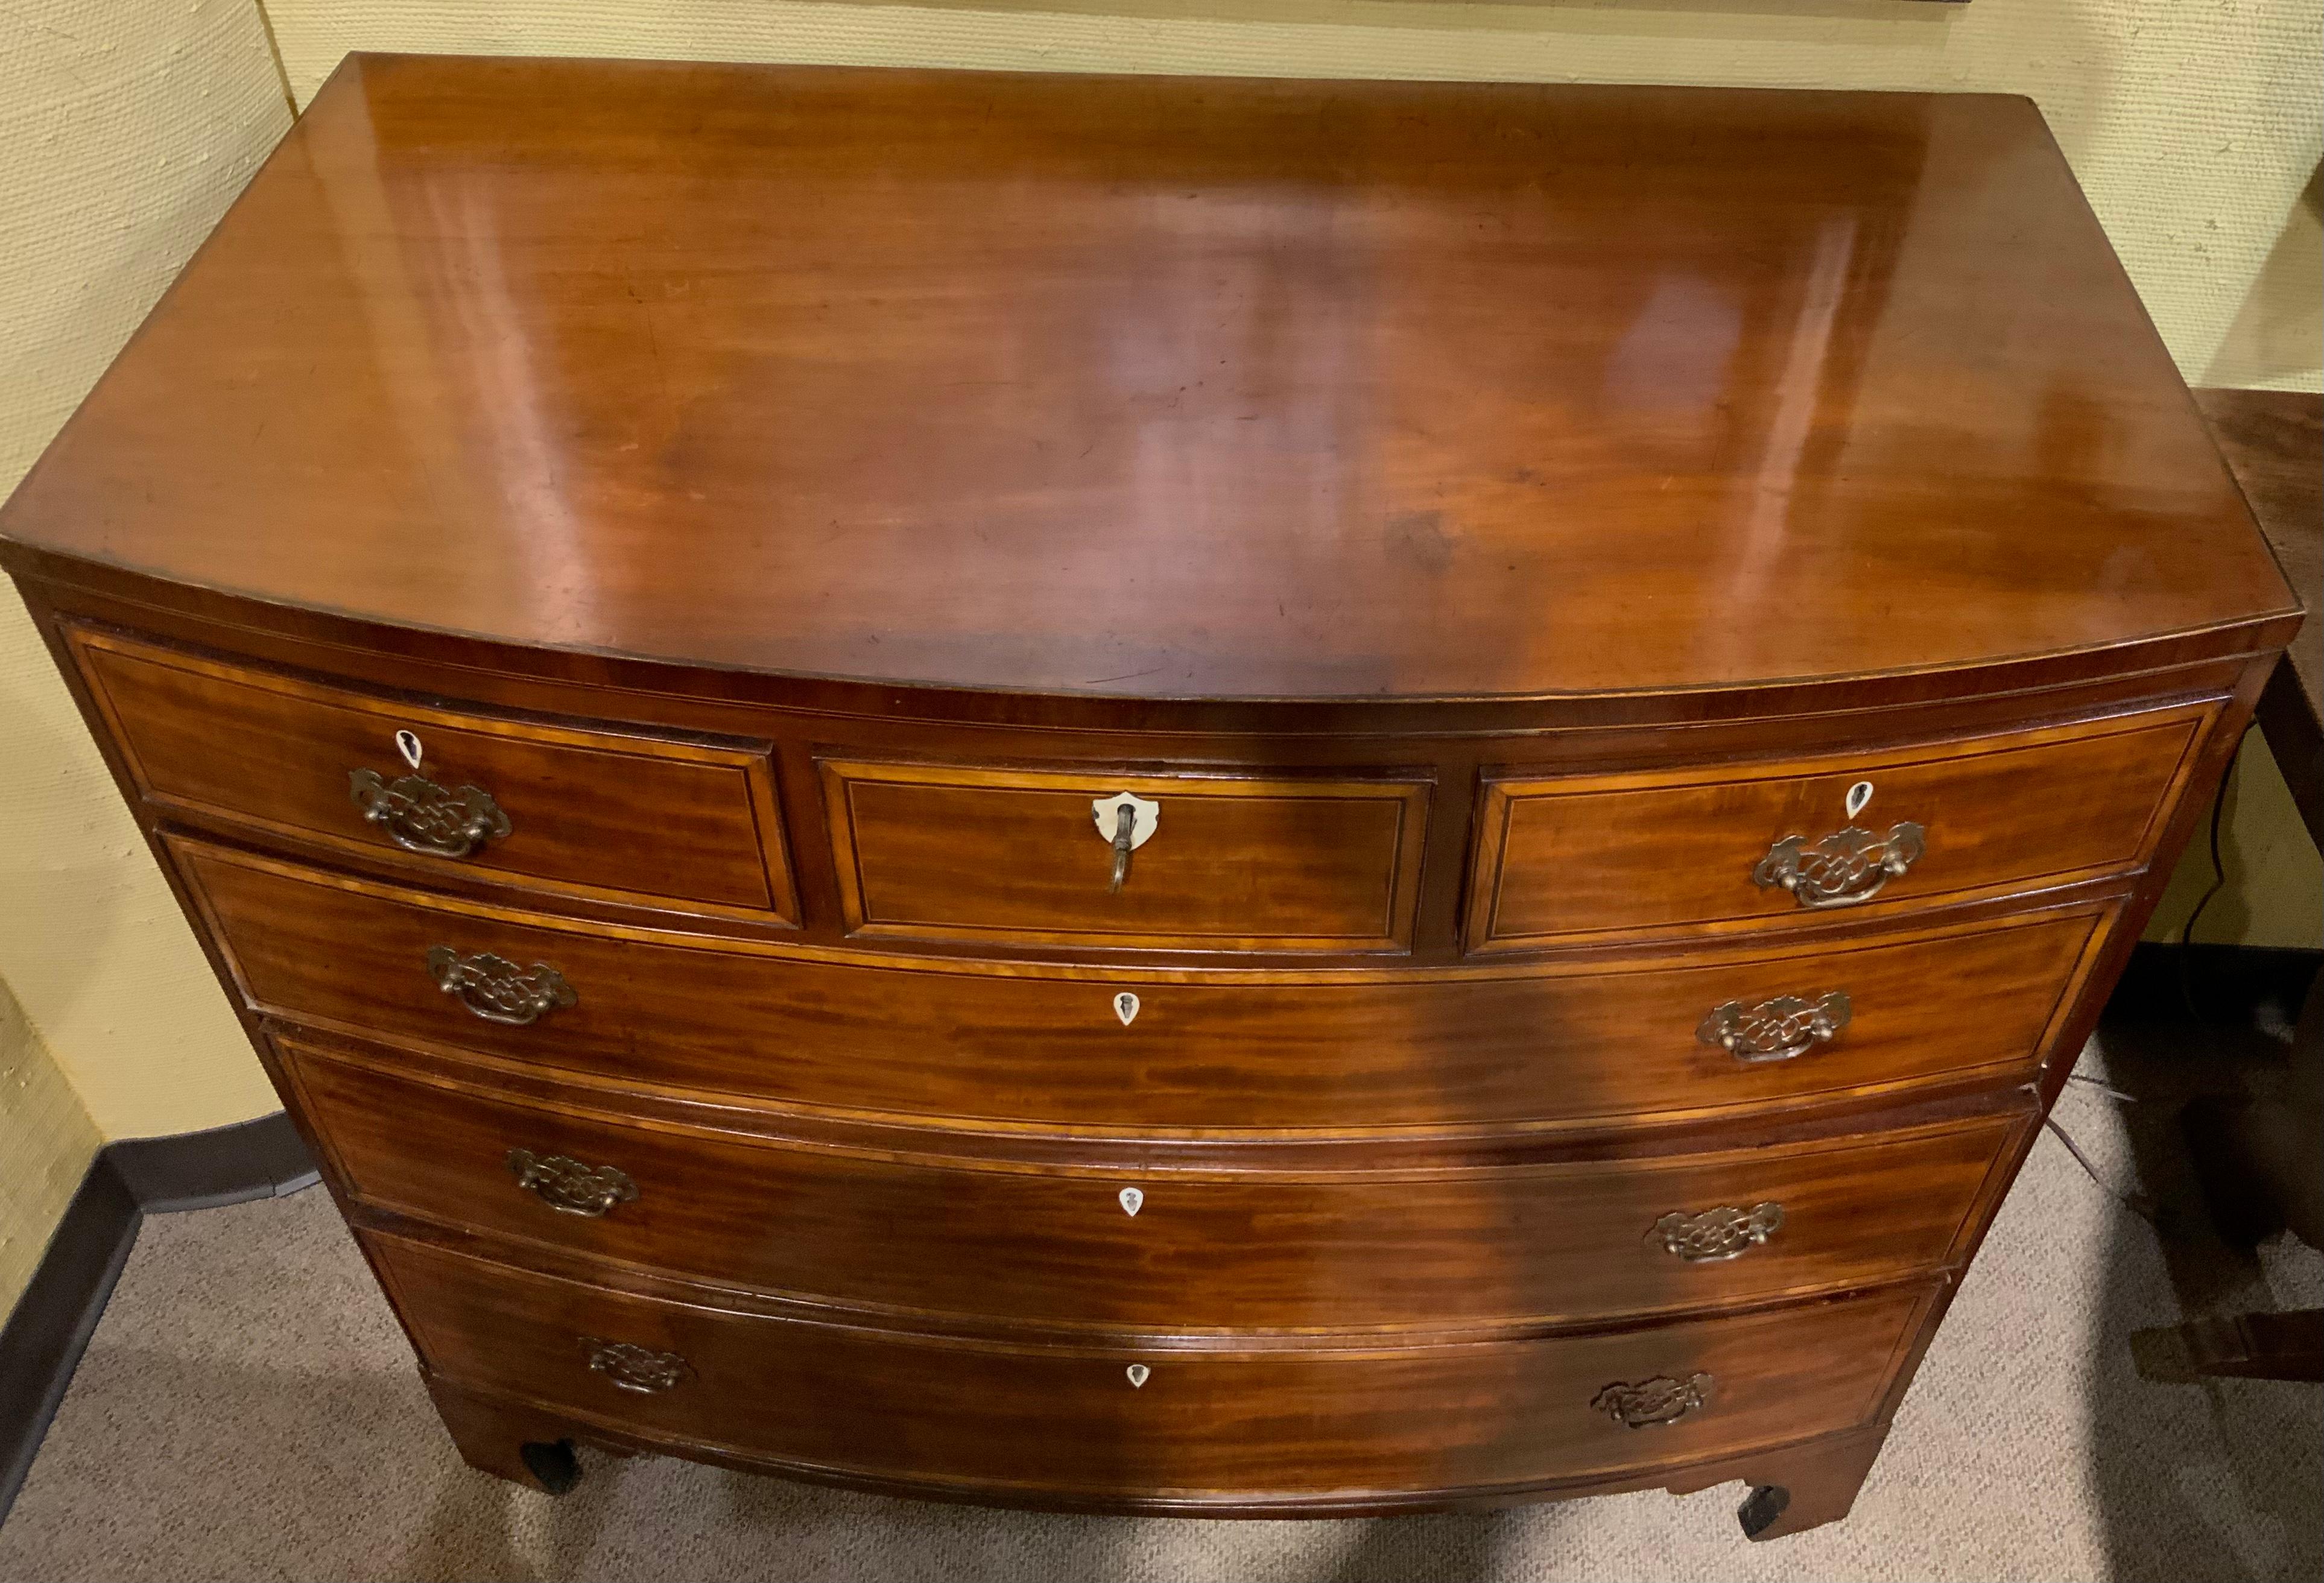 Handsome chest of drawers having three drawers across the top
And three larger drawers under the upper section. All drawers
slide easily and all drawers have a decorative line of ebony
And satinwood. The hardware is original. The chest rests on